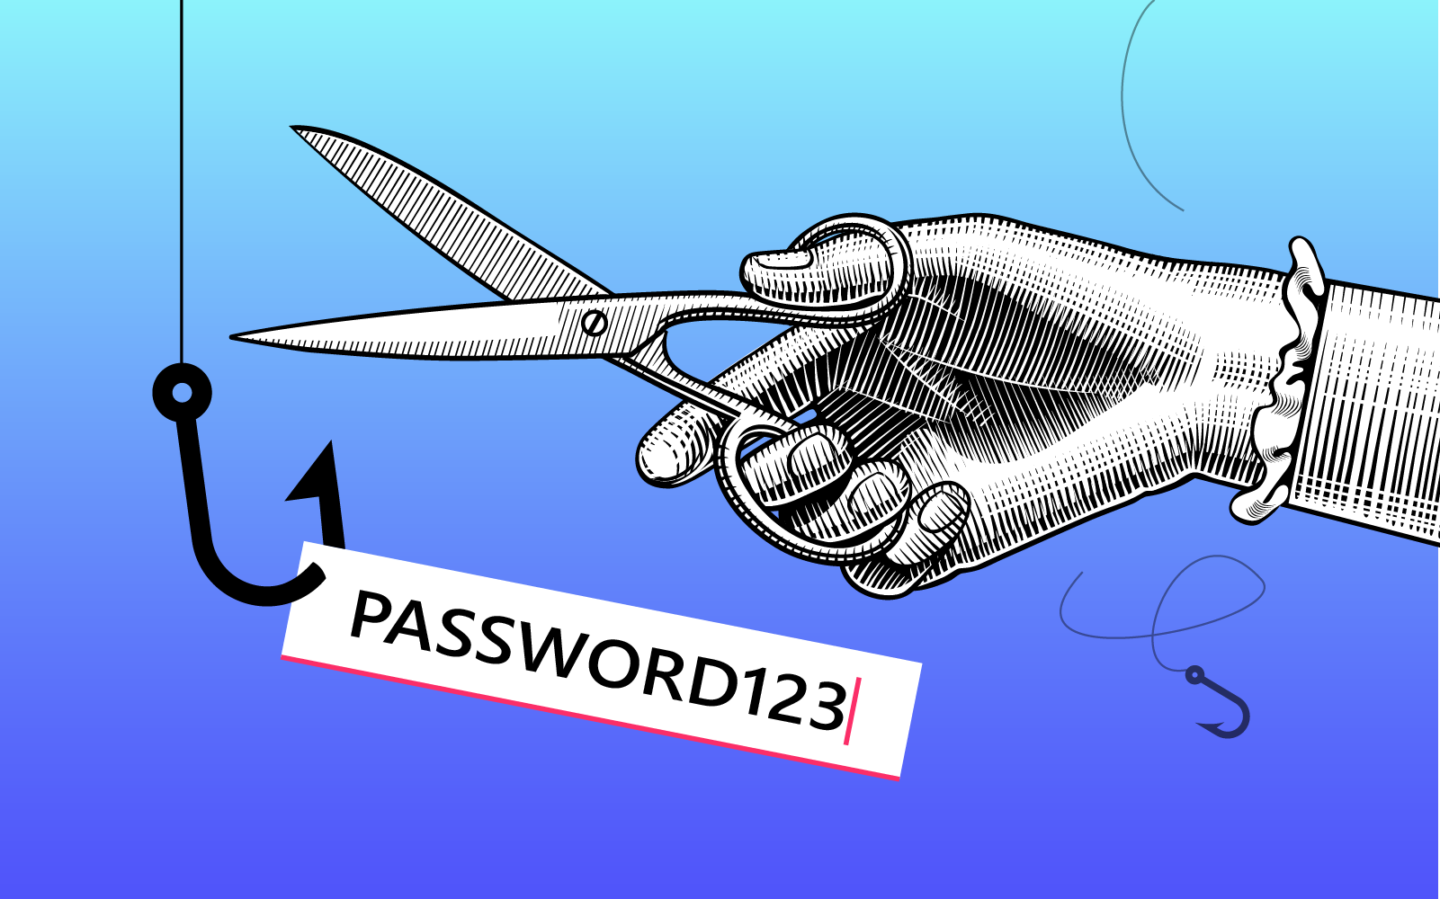 Image of a hand holding scissors that are about to cut the fishing line. The fishing line has a hook on the bottom that's hooked onto a text box that says "PASSWORD123". In the background behind the hand it shows half a string on top of the hand and half a sting with a hook under the hand.